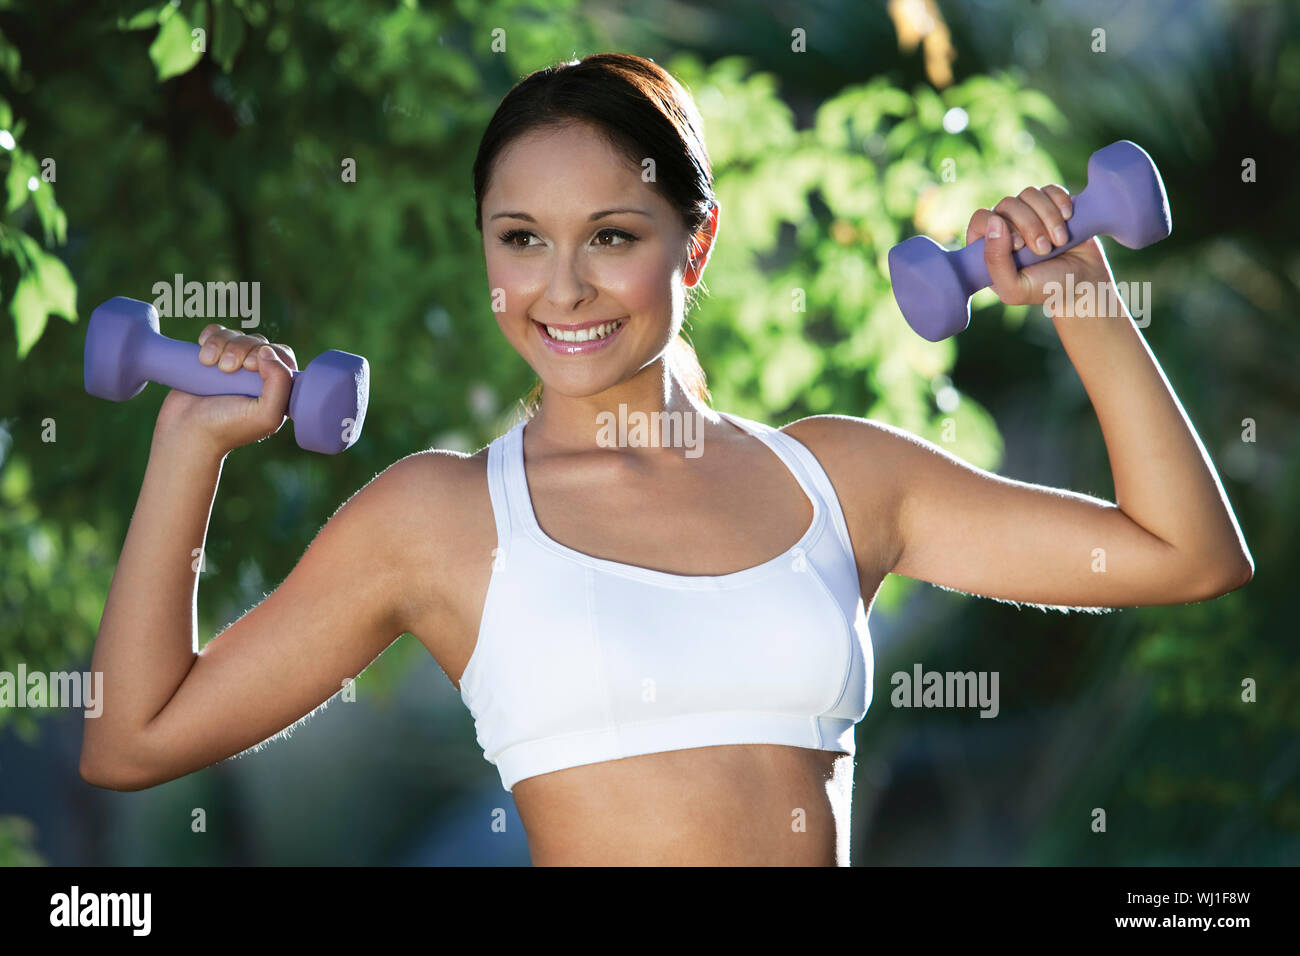 Smiling young woman exercising with dumbbells in the park Stock Photo